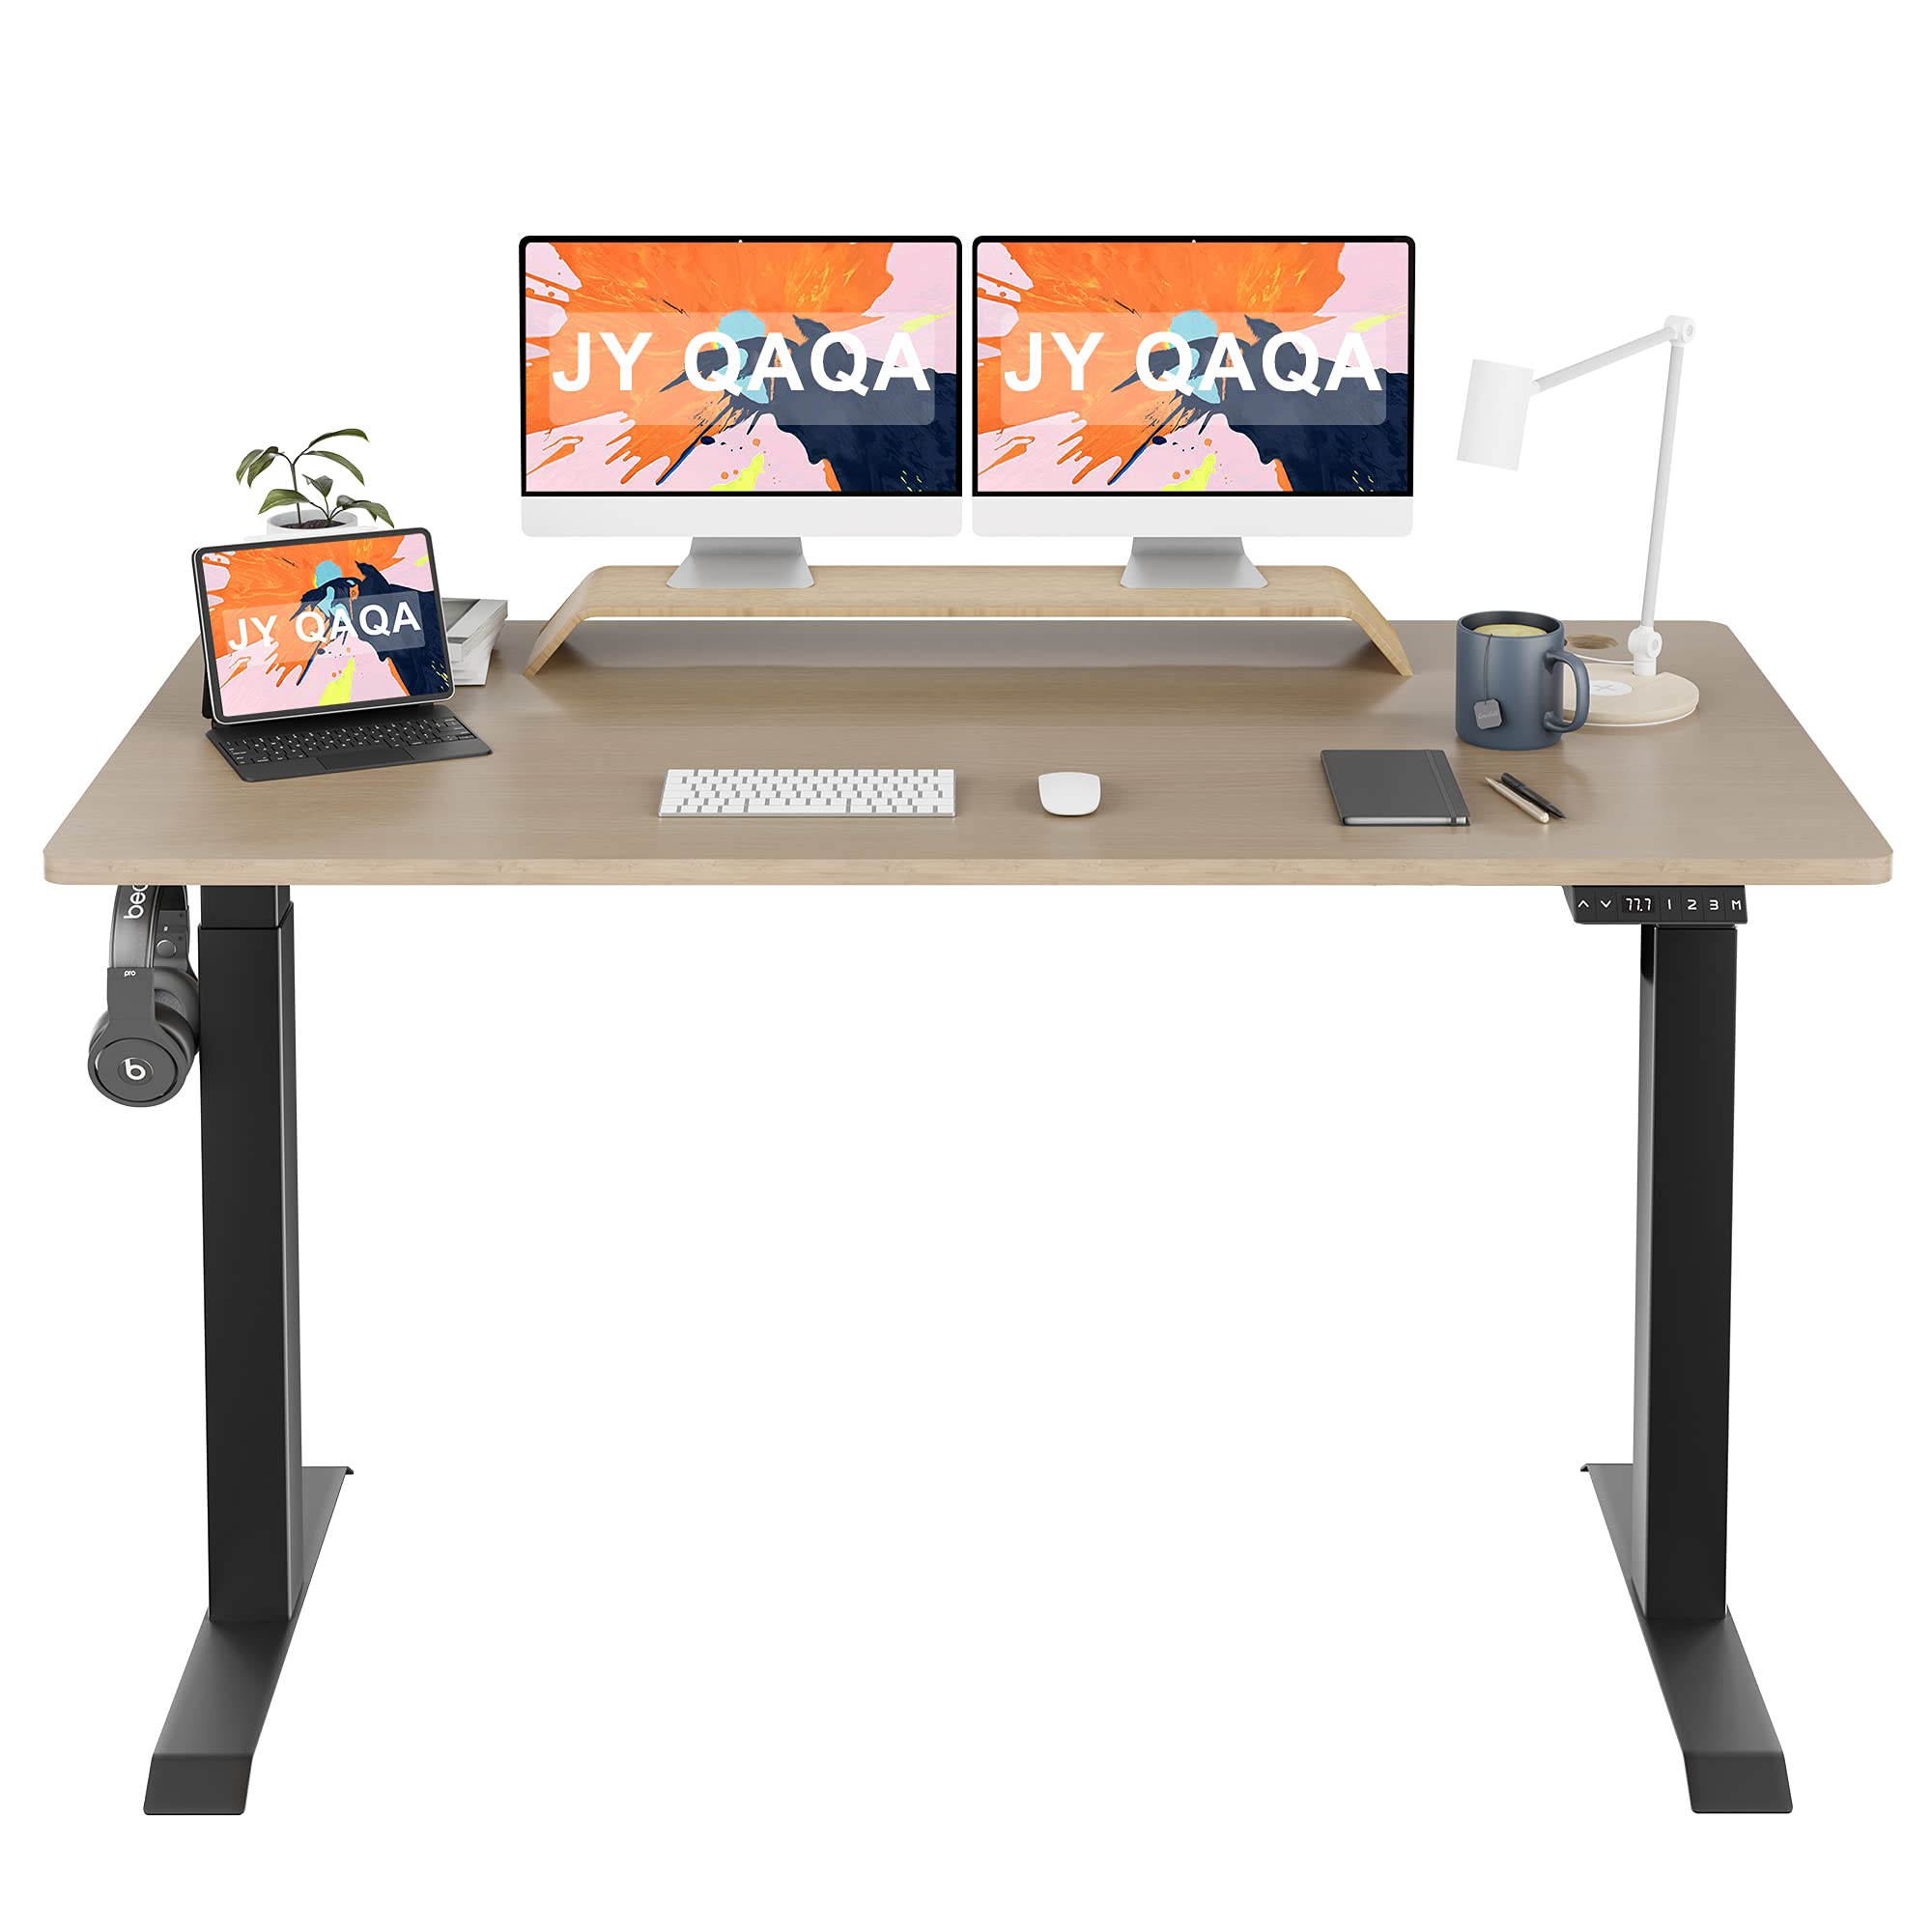 JY QAQA Ergonomic Height Adjustable Computer Desk 63x24 Inches PC Sit-Stand Desk Laptop Table Workstation Electric Sitting Standing Adjustment Desk...